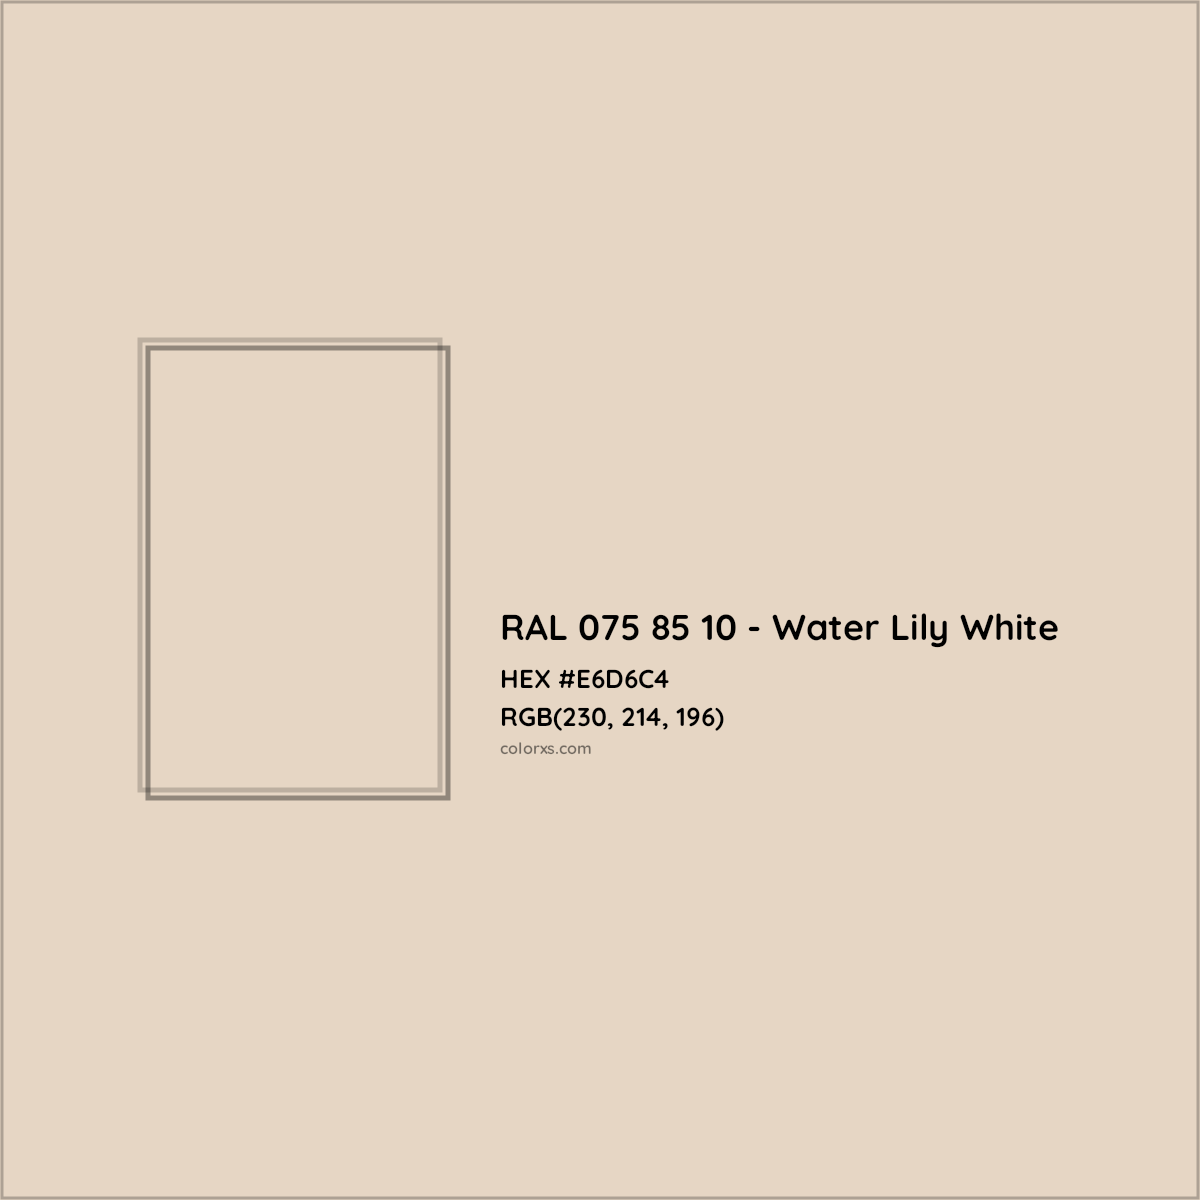 HEX #E6D6C4 RAL 075 85 10 - Water Lily White CMS RAL Design - Color Code